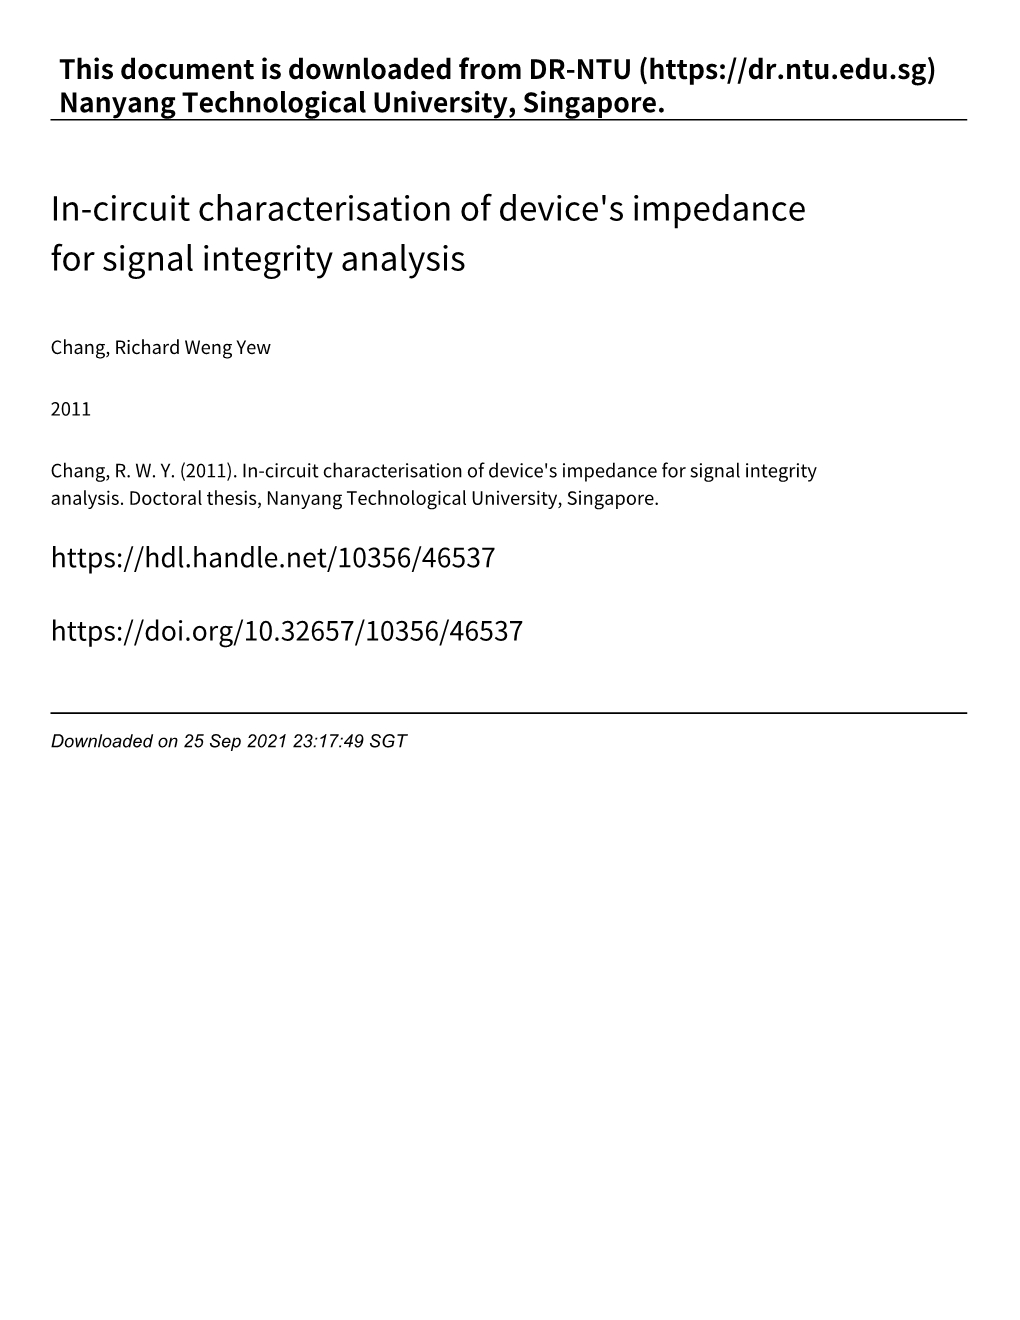 In‑Circuit Characterisation of Device's Impedance for Signal Integrity Analysis